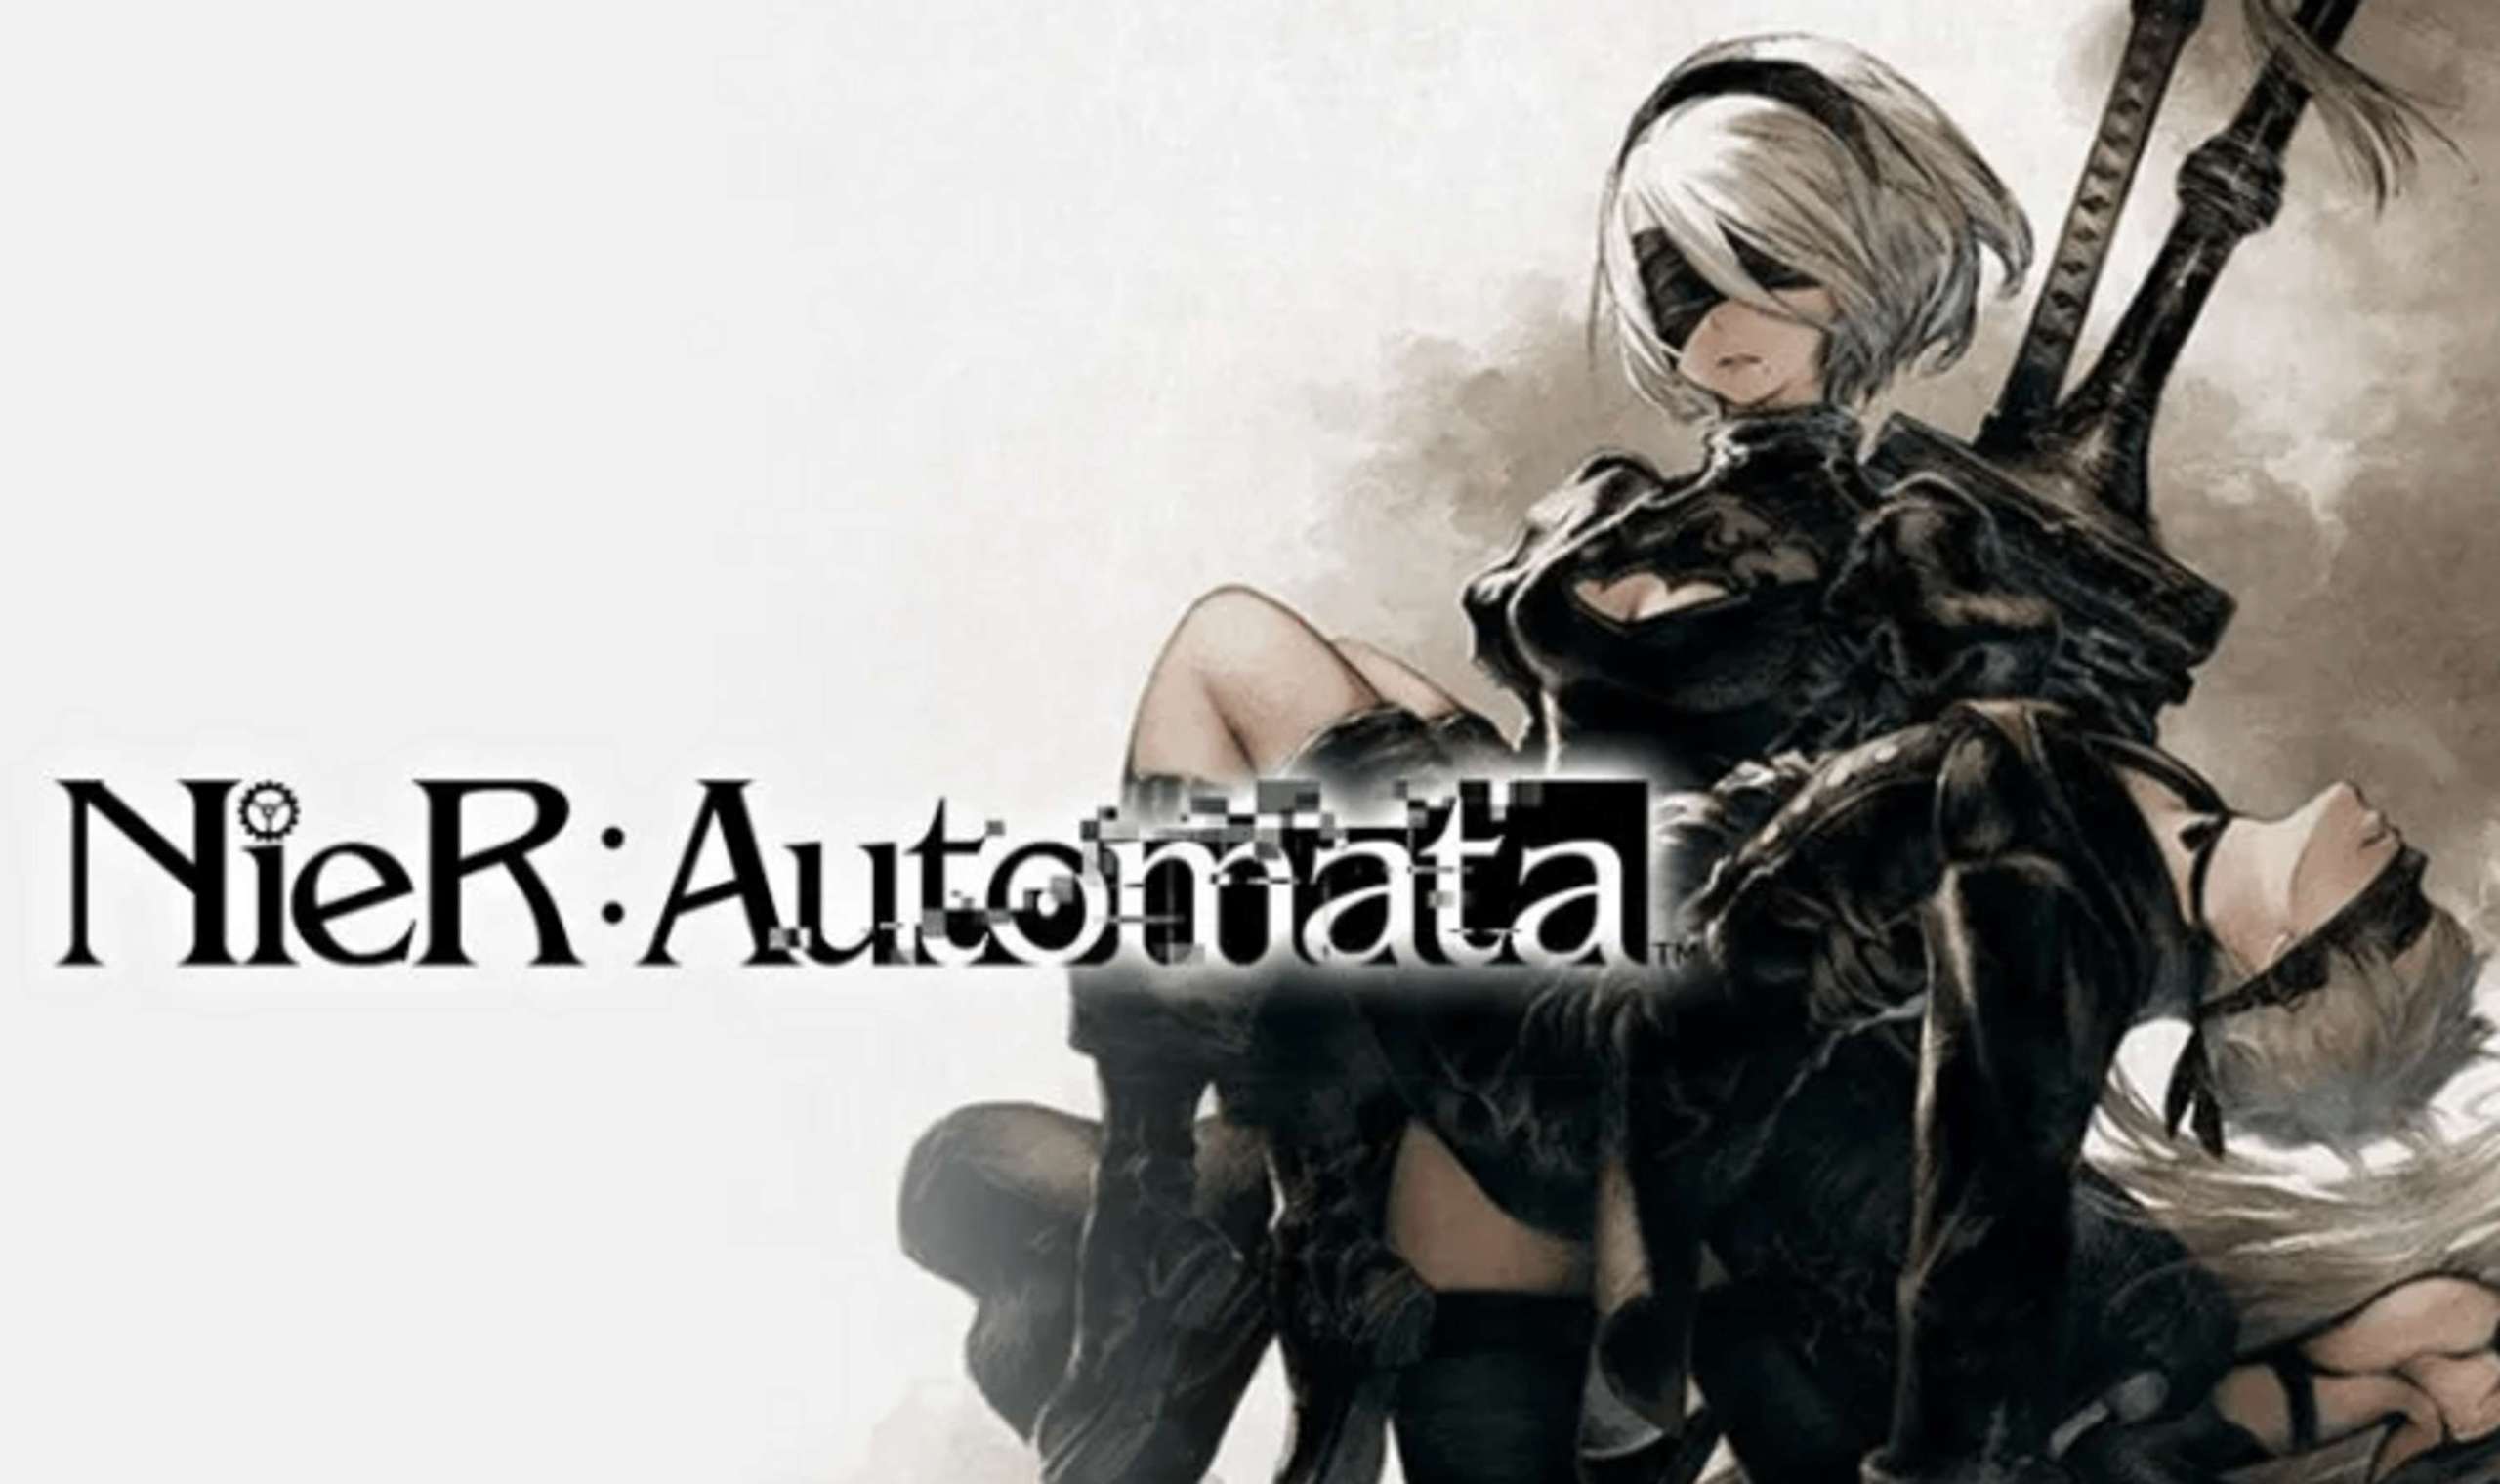 The Mystery Surrounding The Hidden Nier: Automata Church Only Keeps Growing Crazier